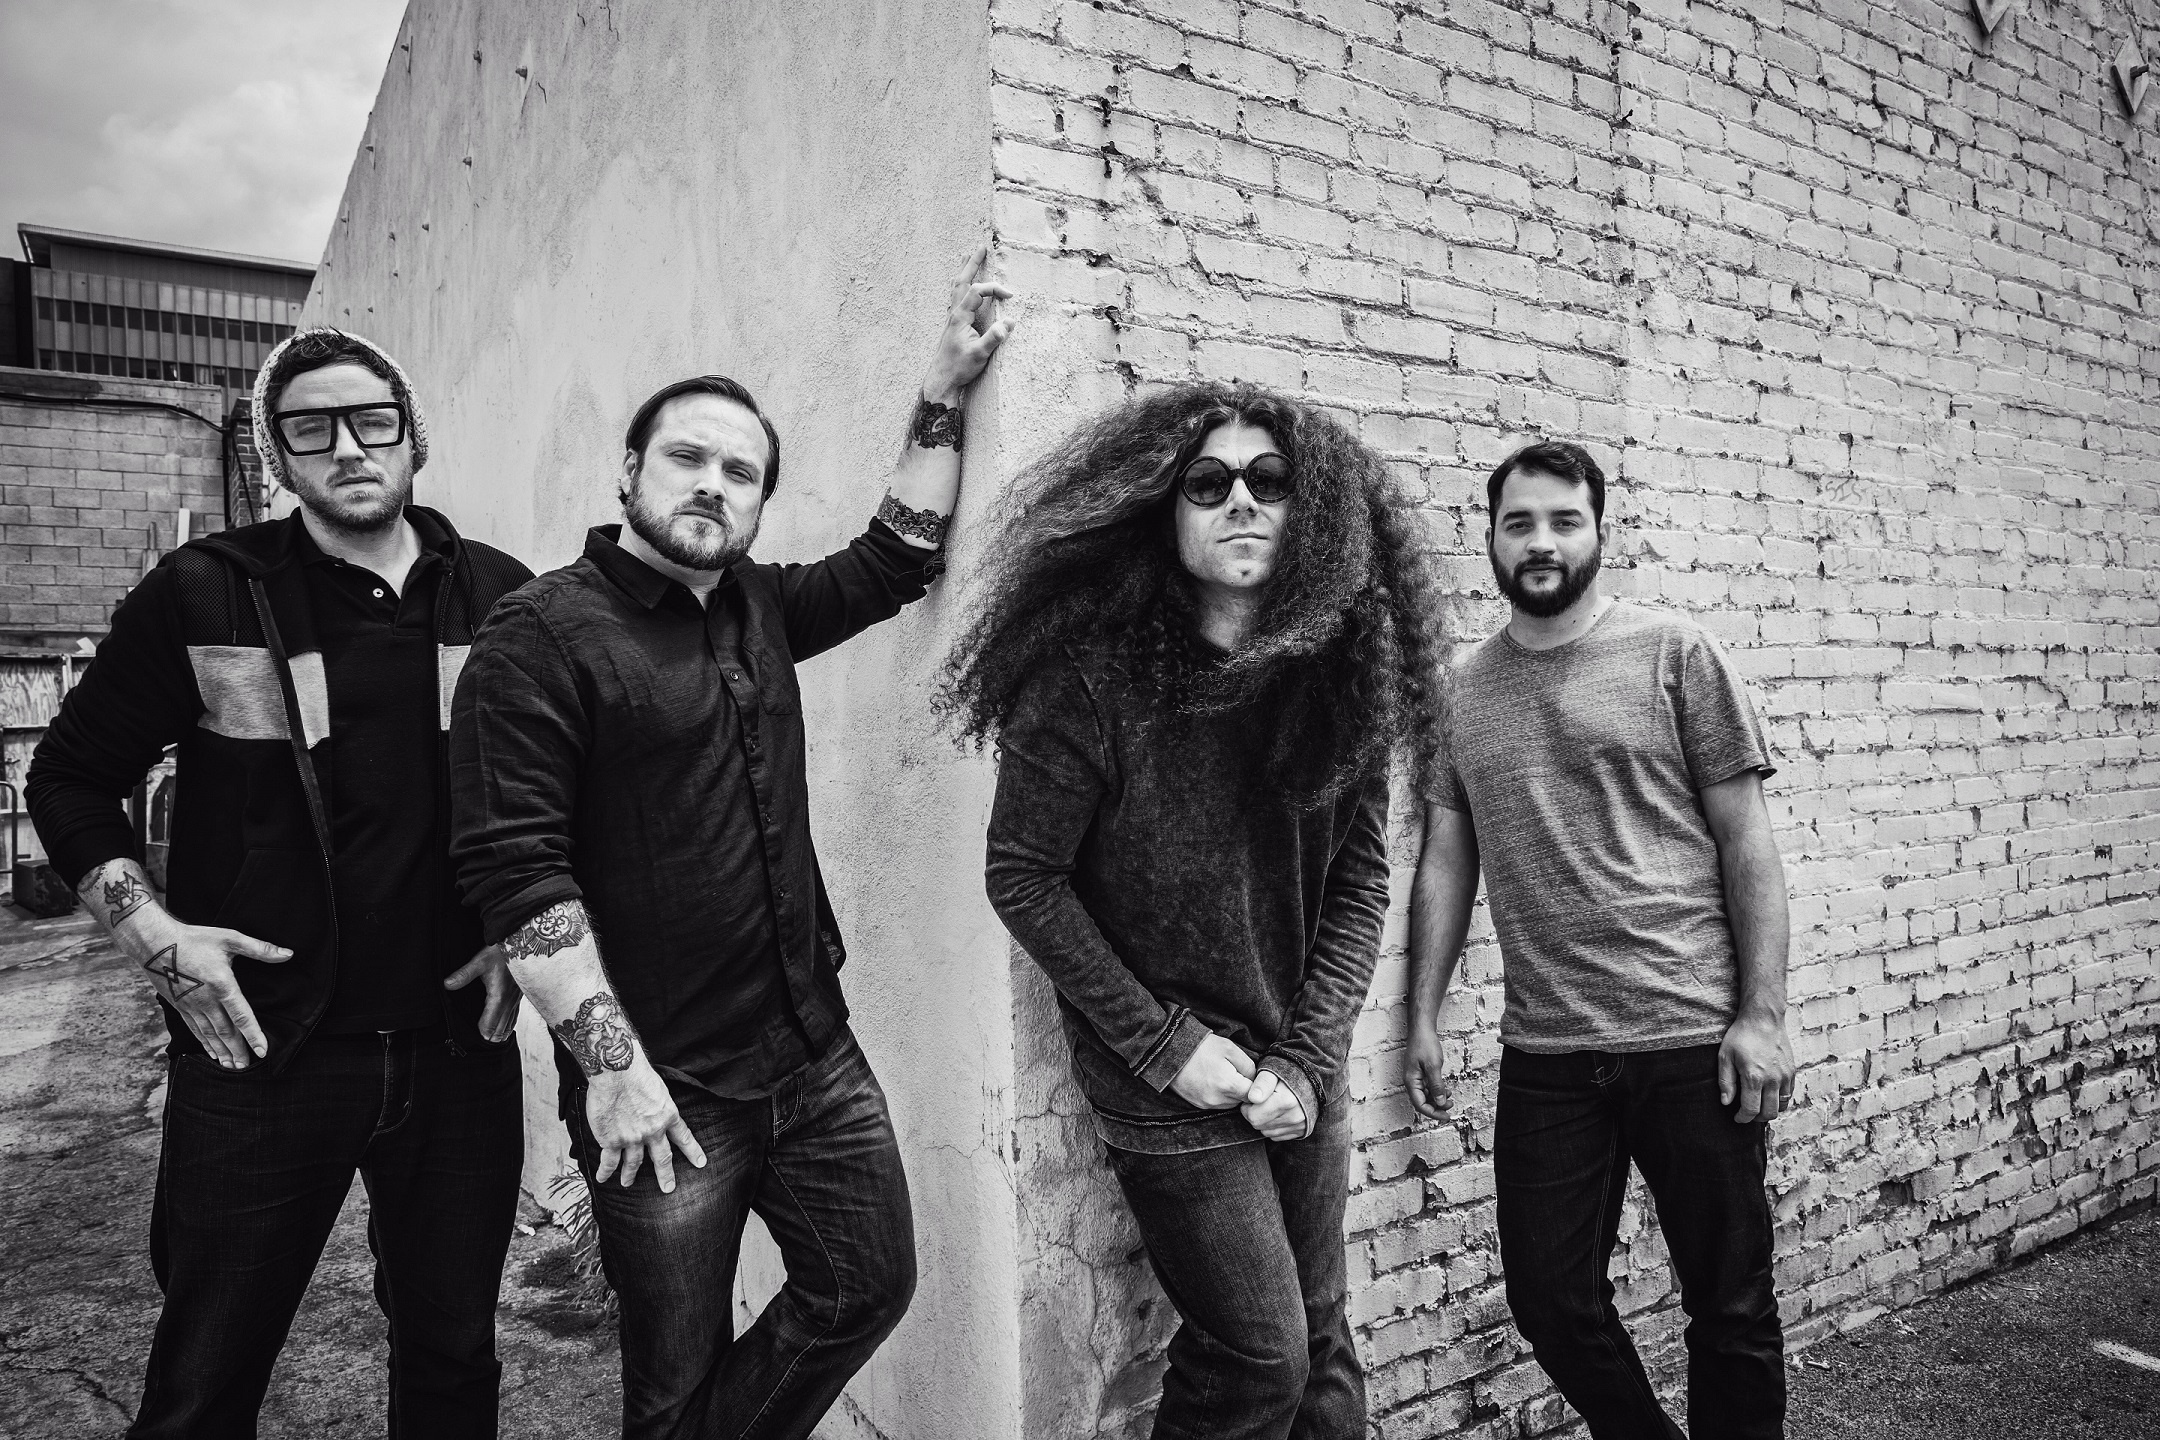 HD wallpaper, 2160X1440 Hd Desktop, Coheed And Cambria, Roadrunner Records, Desktop Hd Coheed And Cambria Wallpaper, Bloody Disgusting